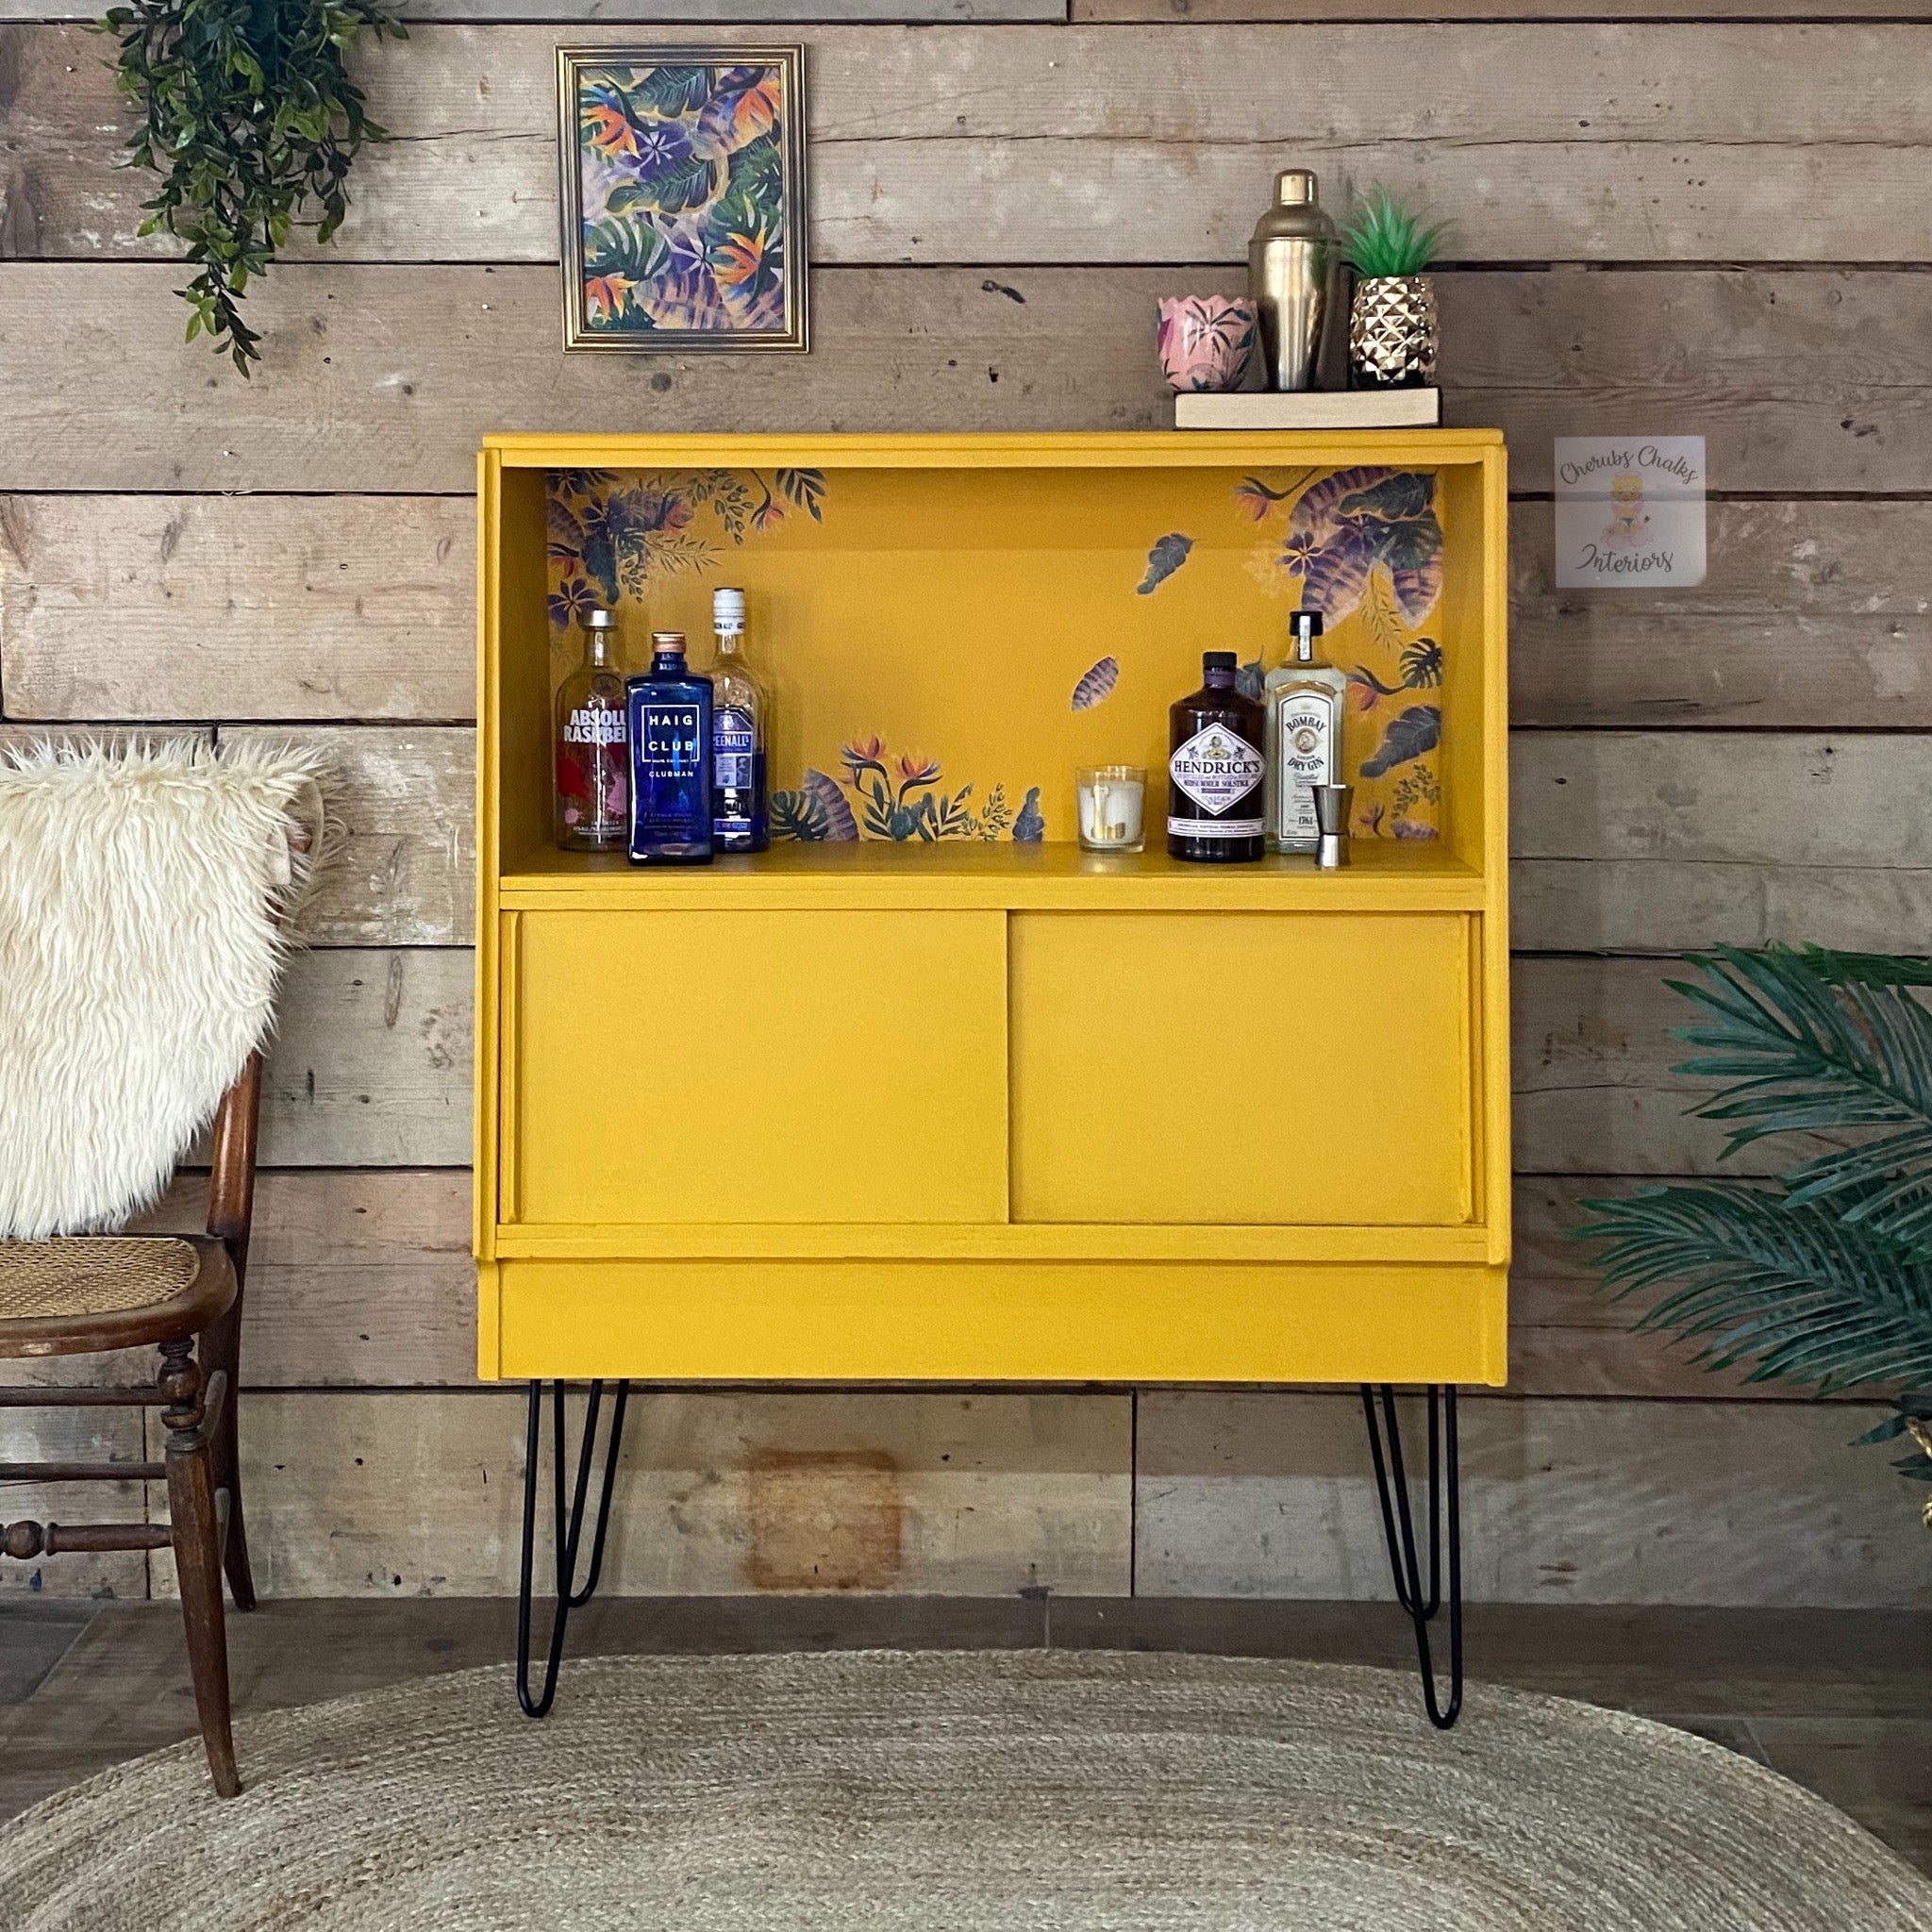 A mid-centure bar cabinet refurbished by Cherbs Chalks Interiors is painted in Dixie Belle's Colonel Mustard chalk mineral paint.